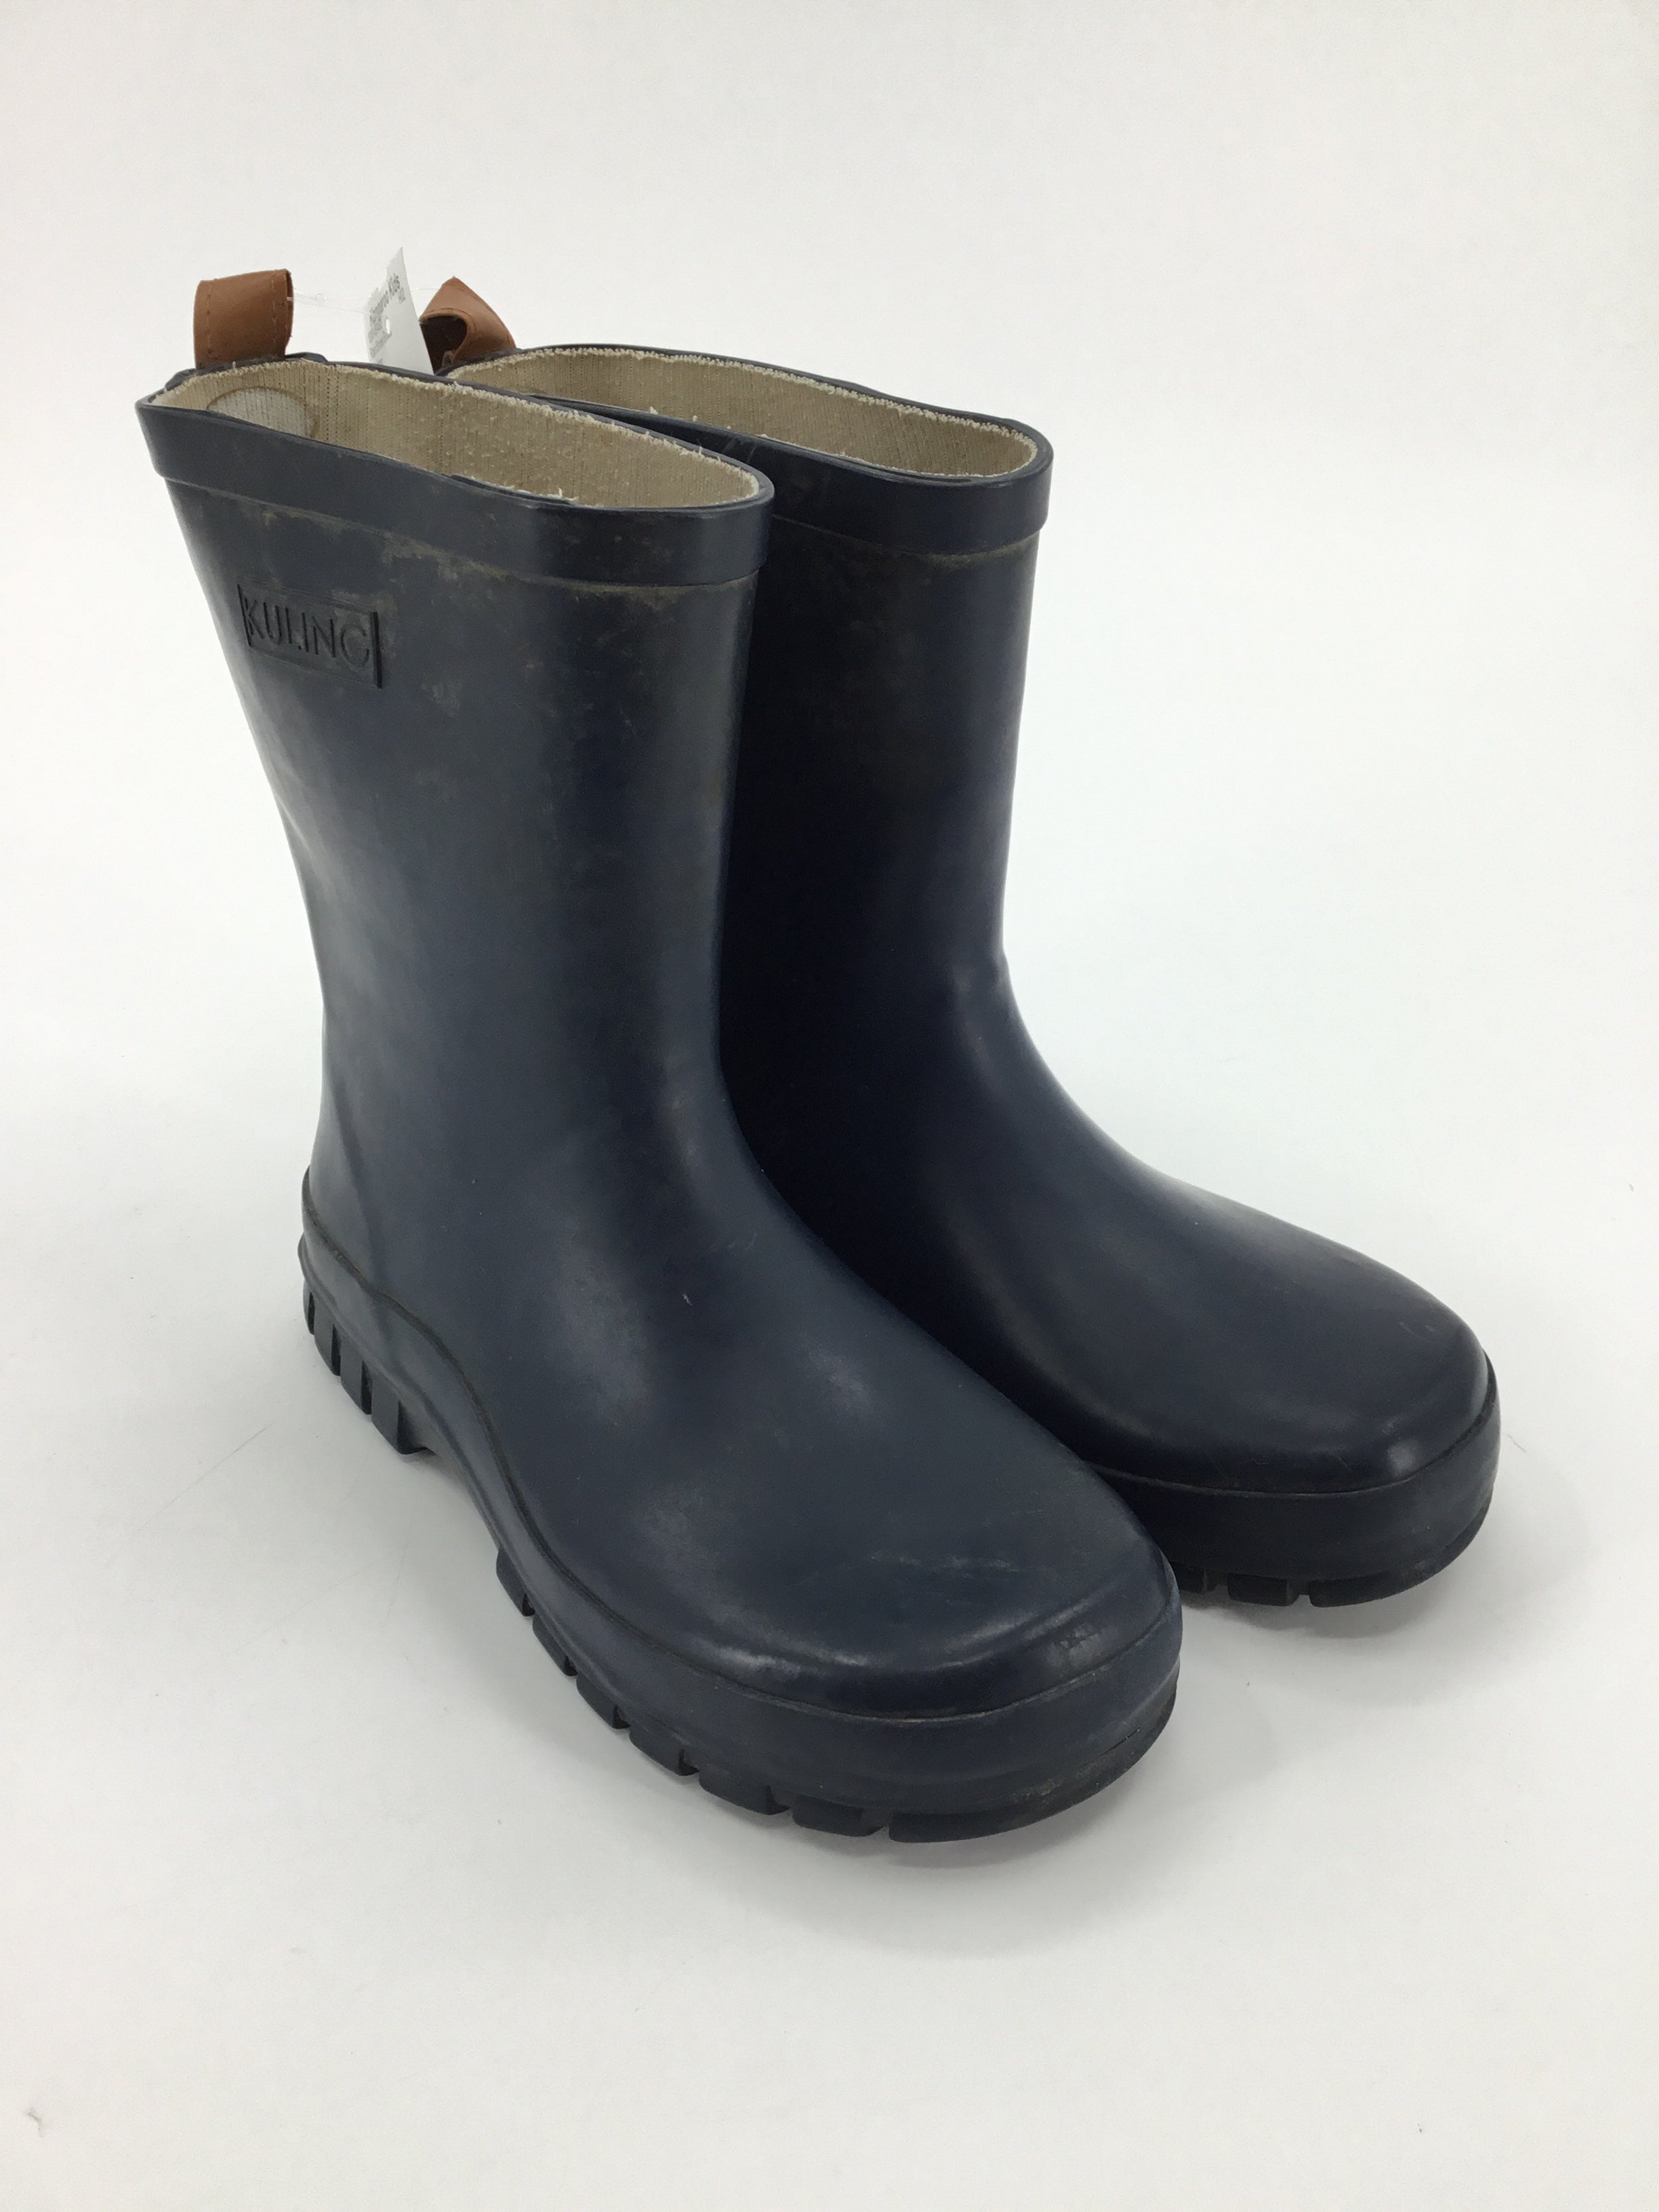 Kuling Child Size 6 Youth Navy Rain/Snow Boots